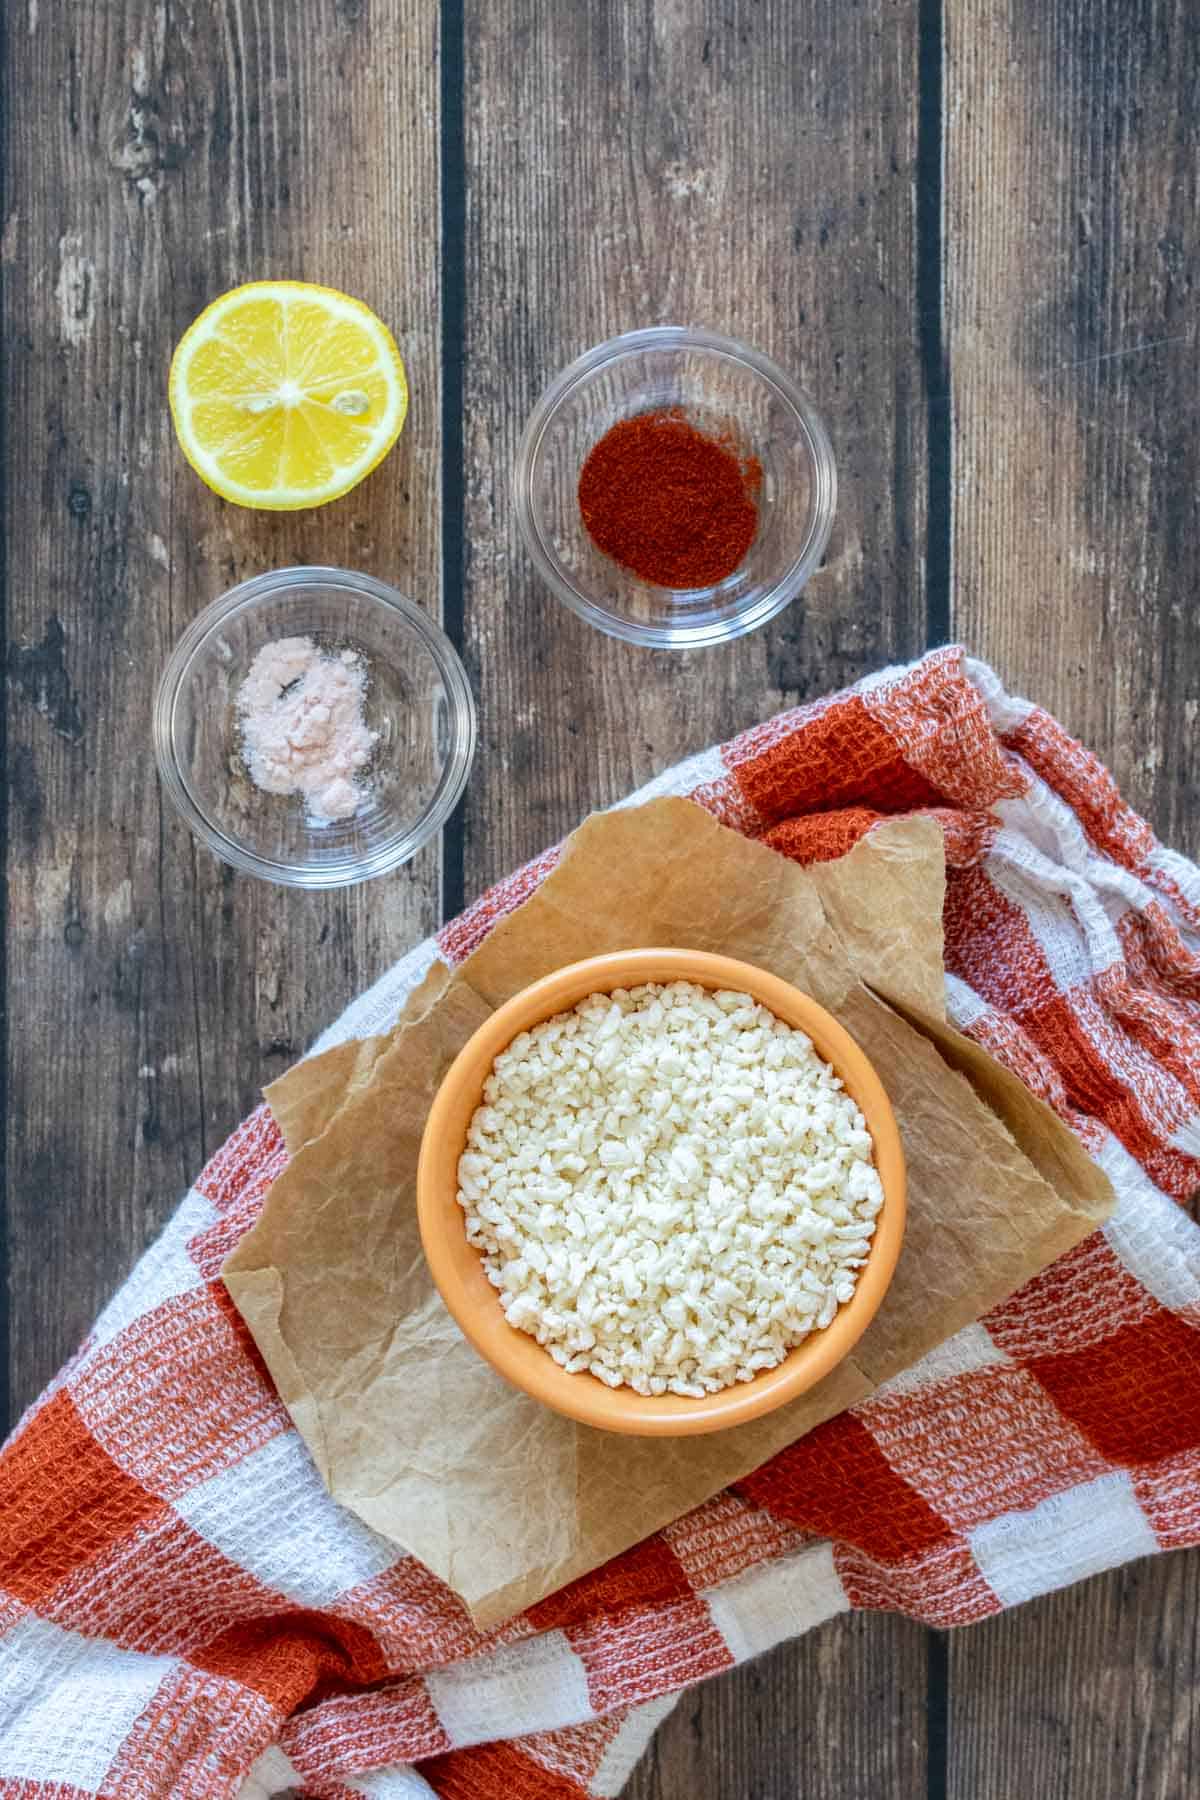 A bowl of breadcrumbs, salt, paprika and a lemon on a wooden surface with a checkered orange towel